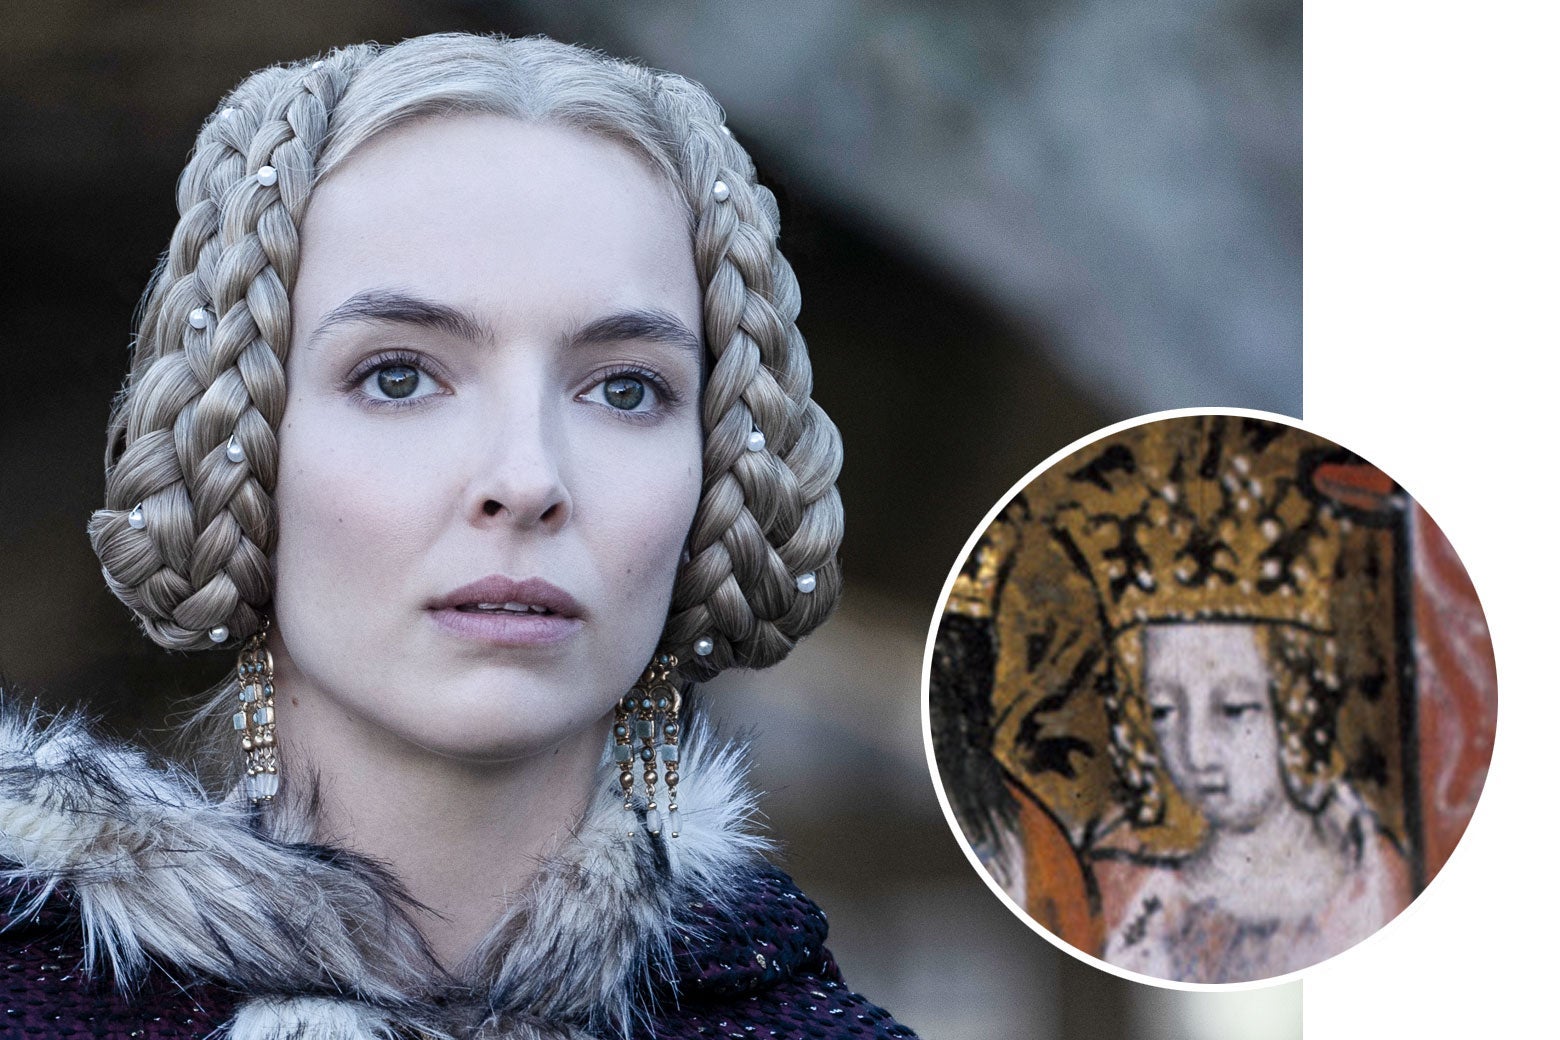 An image for Jodie Comer from the movie with two blond braids with jewels in them wrapped in buns on each side of her head. An inset image shows a historical depiction of Queen Guinevere wearing a crown and hair on each side of her head.